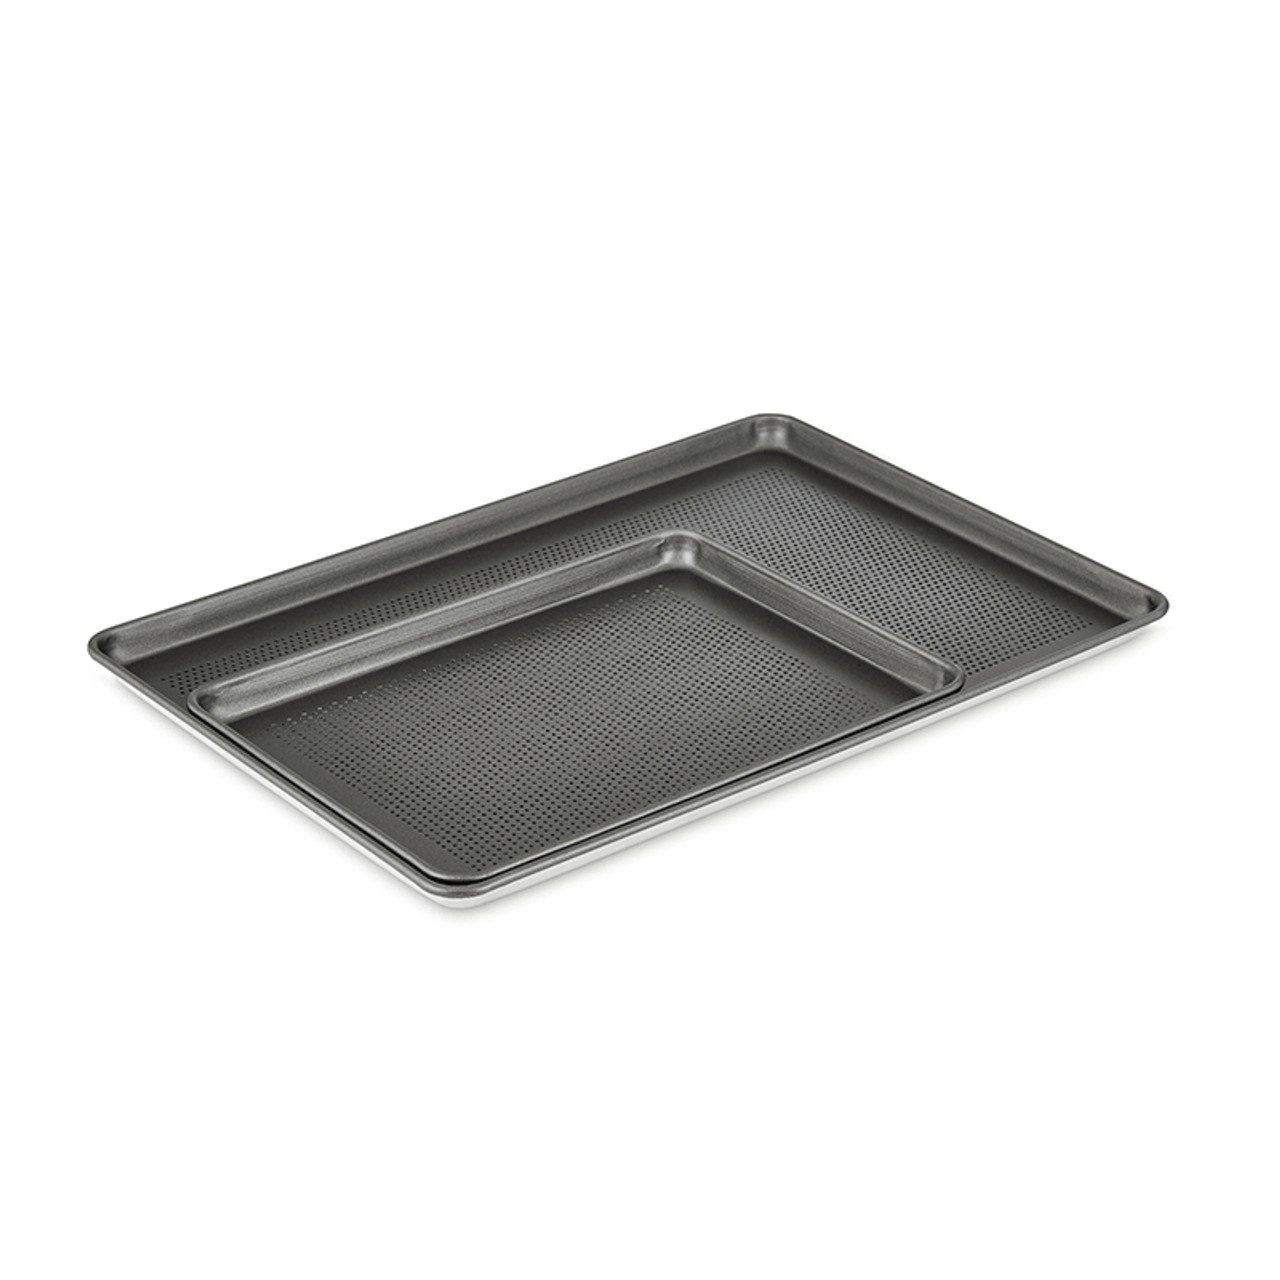 Vollrath 5303NSP Wear-Ever 1/2 Size Non-Stick Perforated Sheet Pan